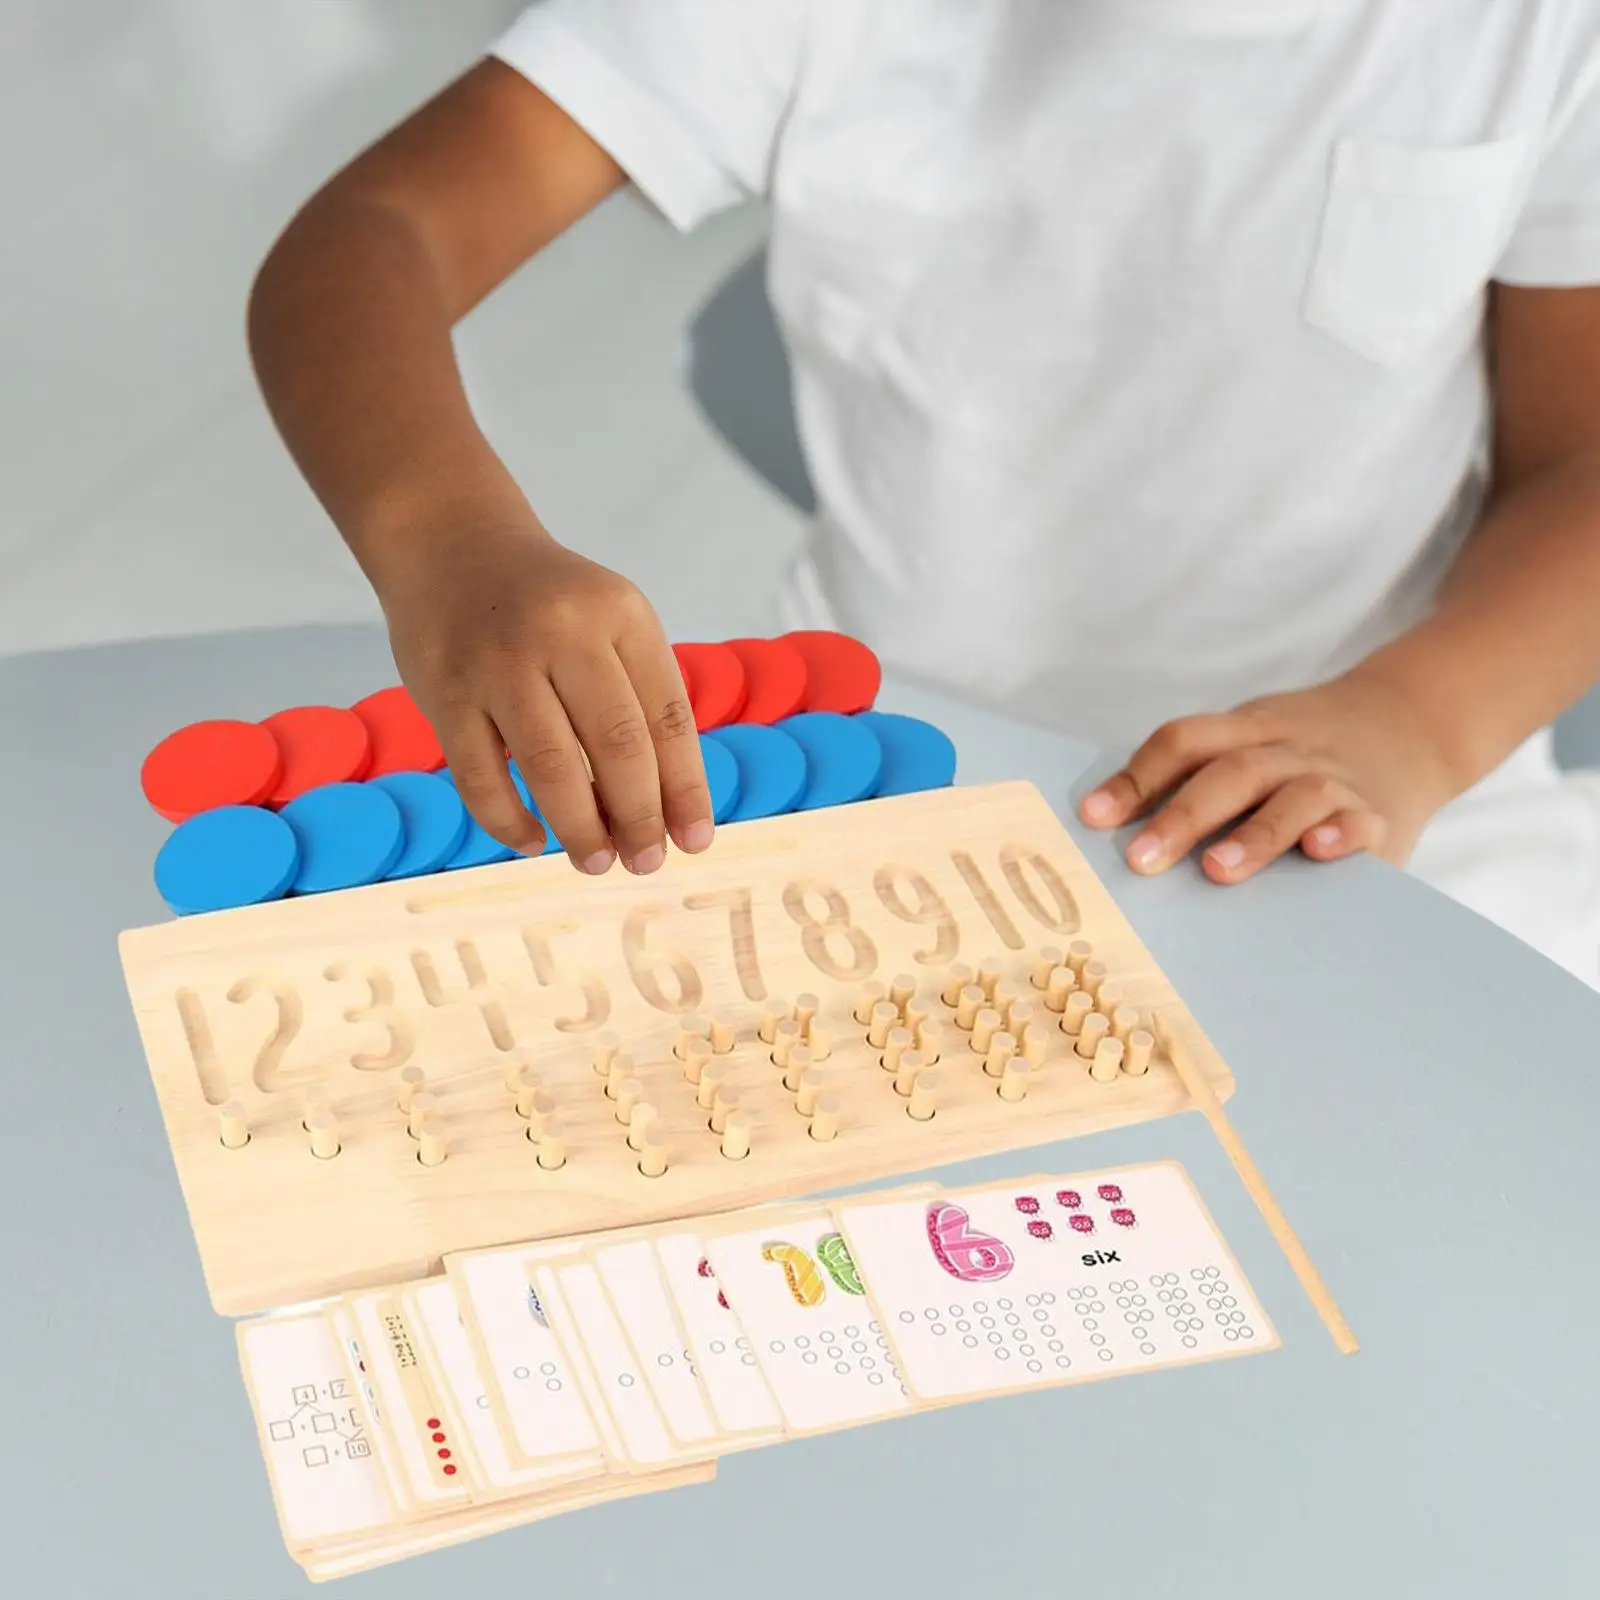 Tracing Board Education Handwriting Aids Learning for Preschool